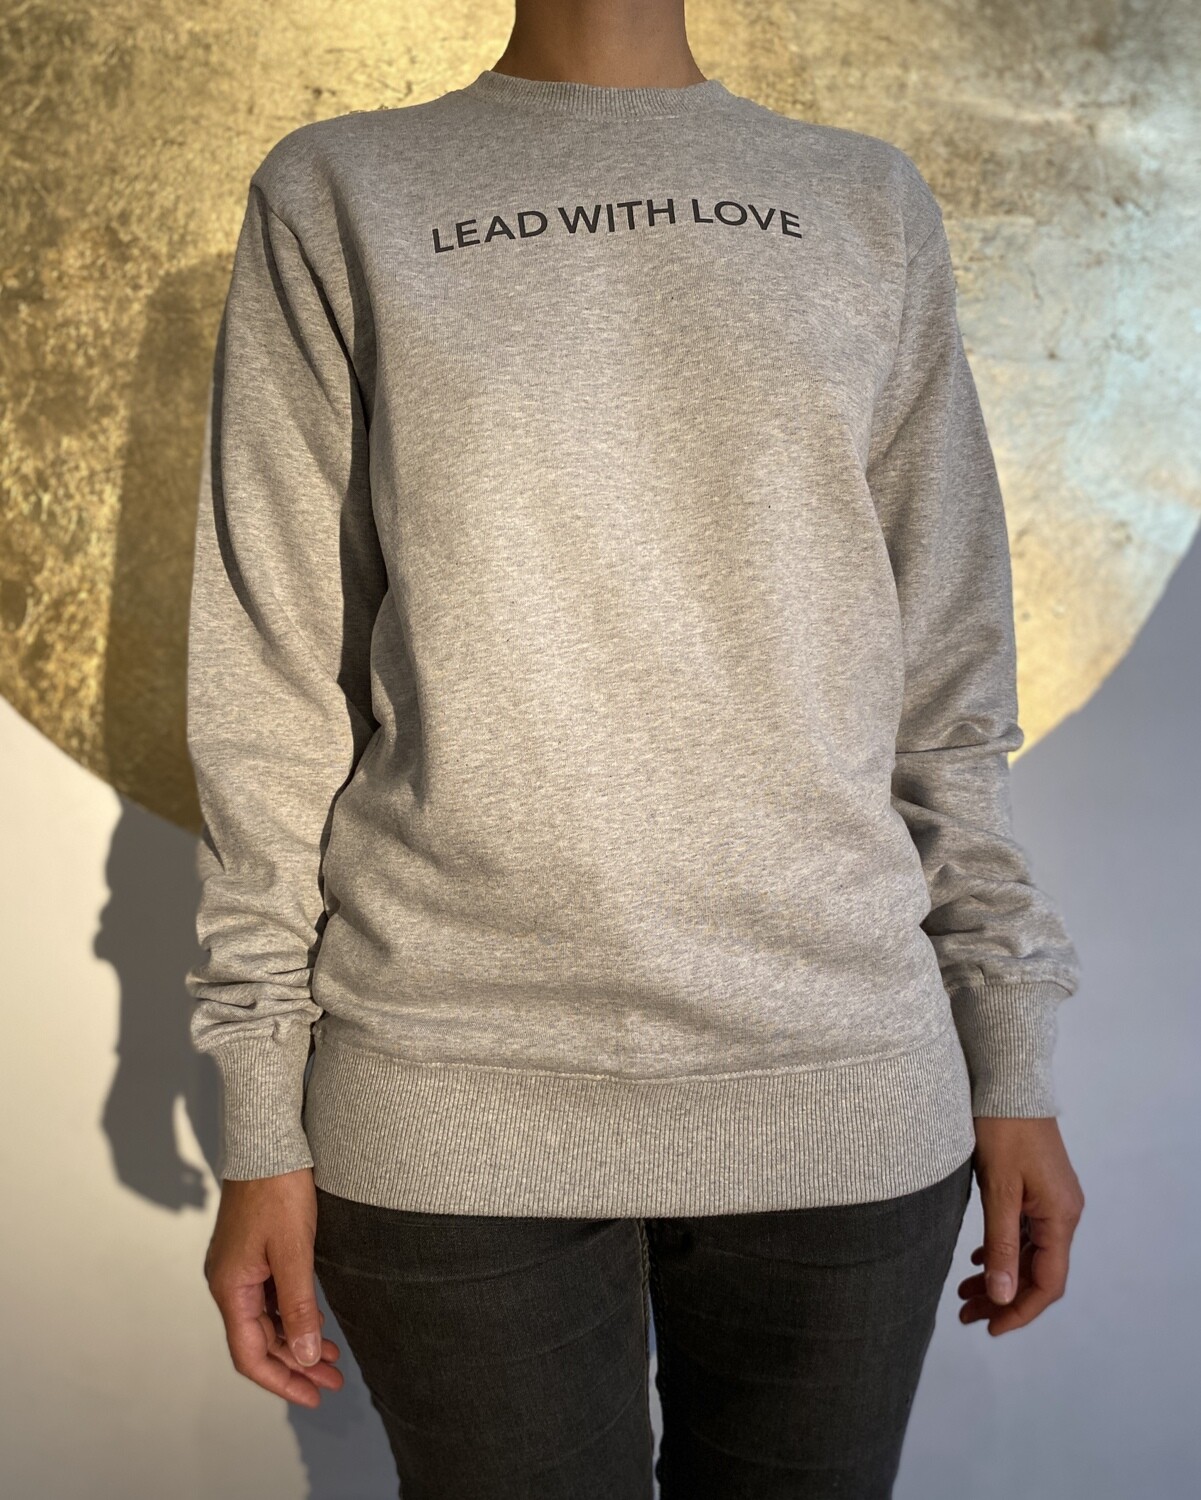 LEAD WITH LOVE by The Lovers, Sweater – grau / Druck grau